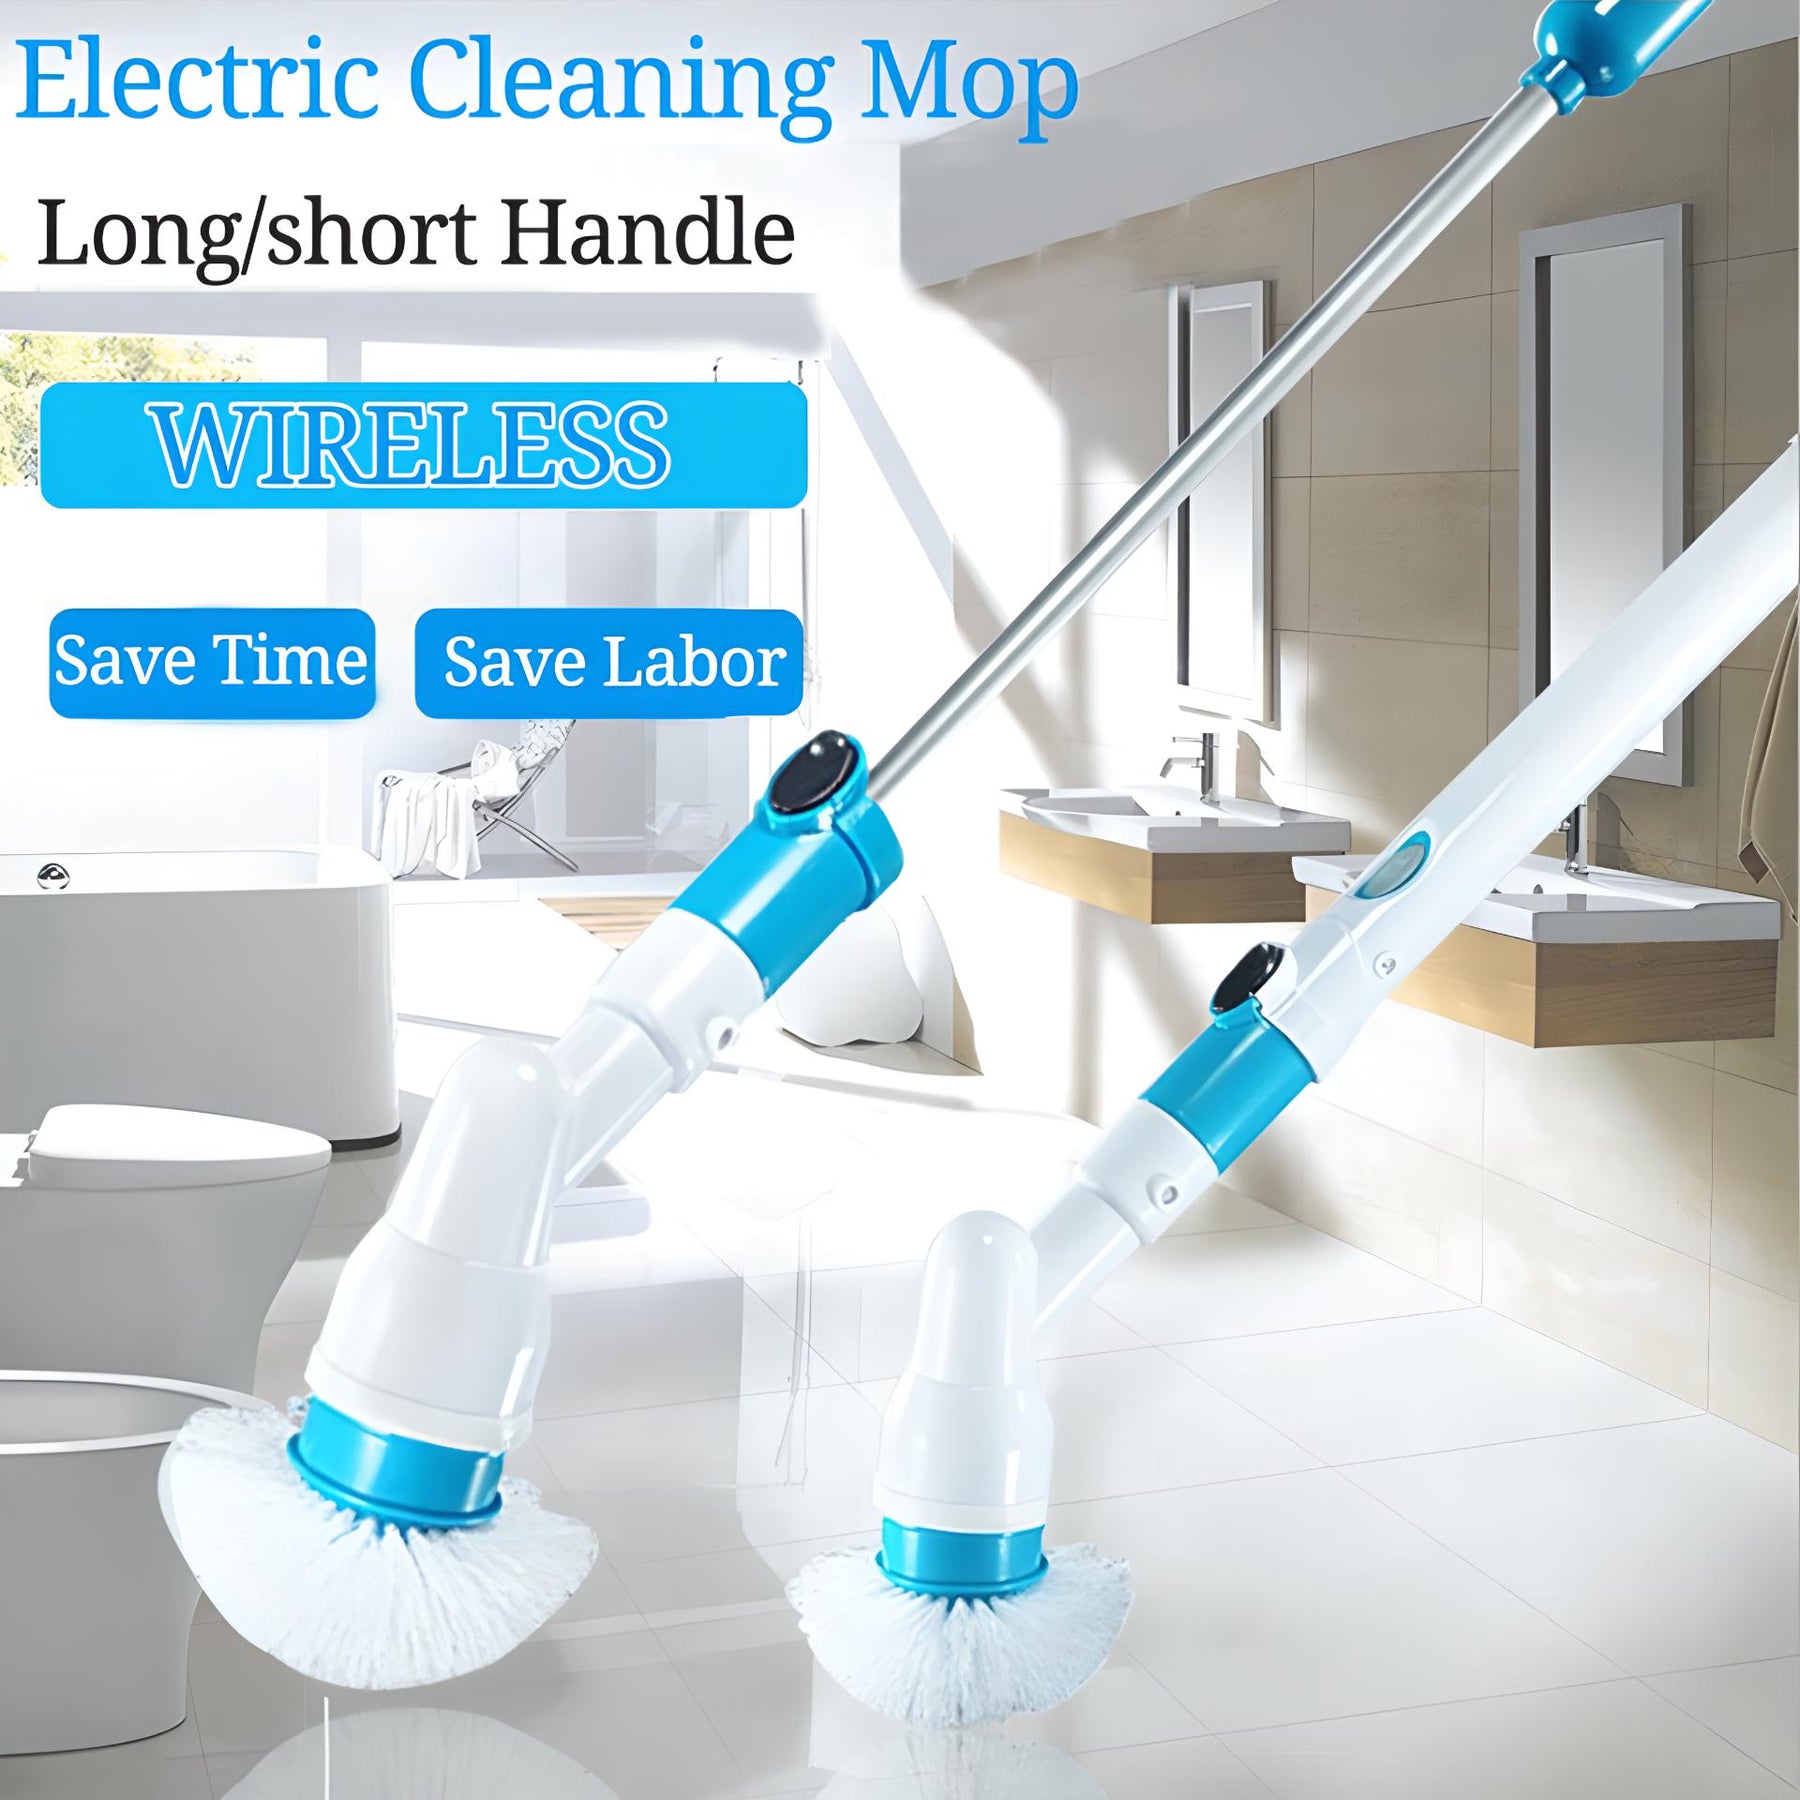 Scrub Away Grime with Ease: The Turbo Clean Electric Spin Scrubber Set - Gear Elevation